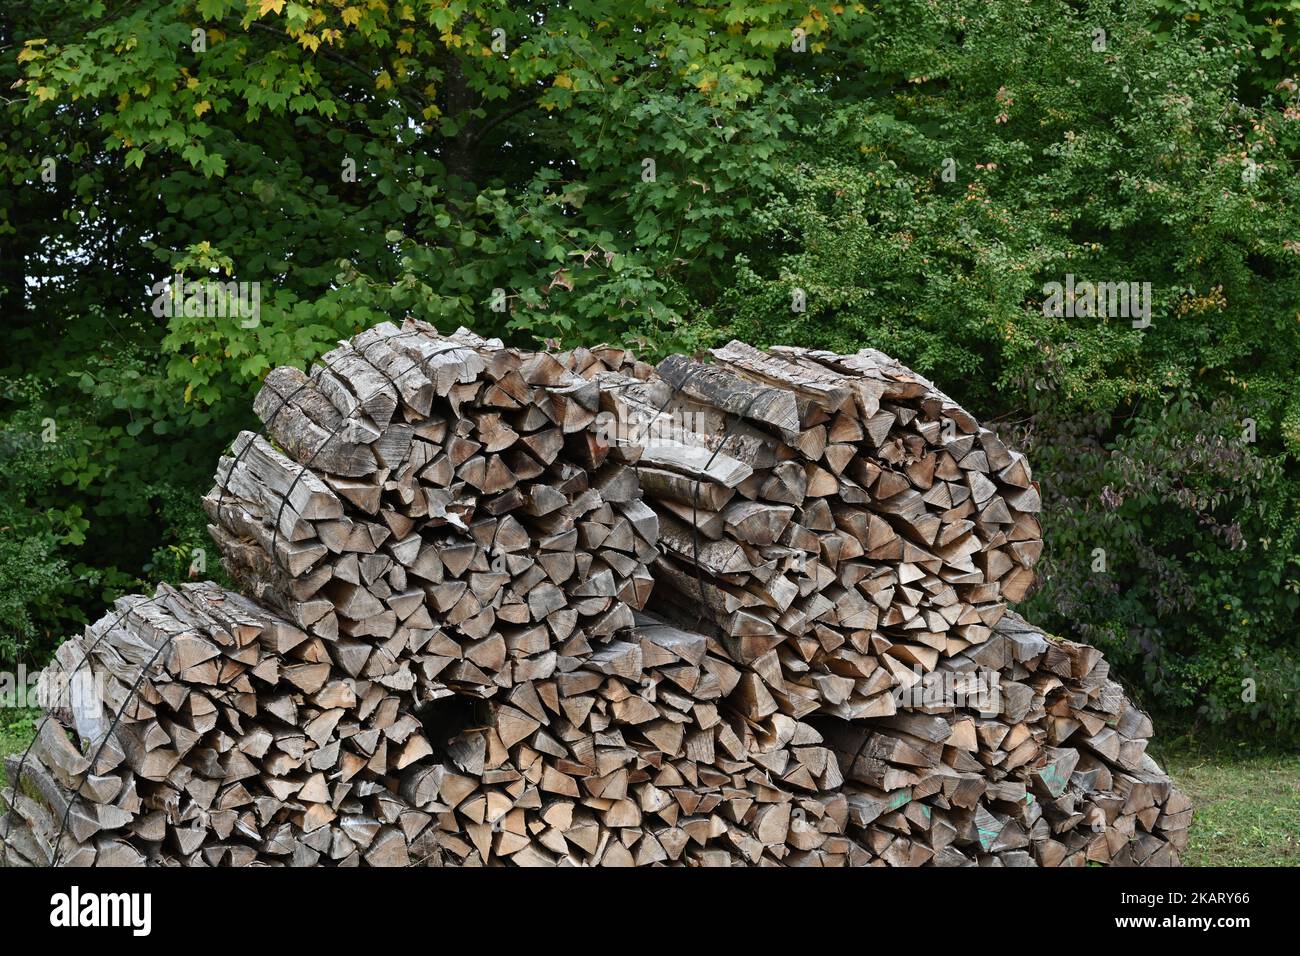 Logs of firewood bound together into big bundles. There are five bundles stacked together and stored outside. Stock Photo